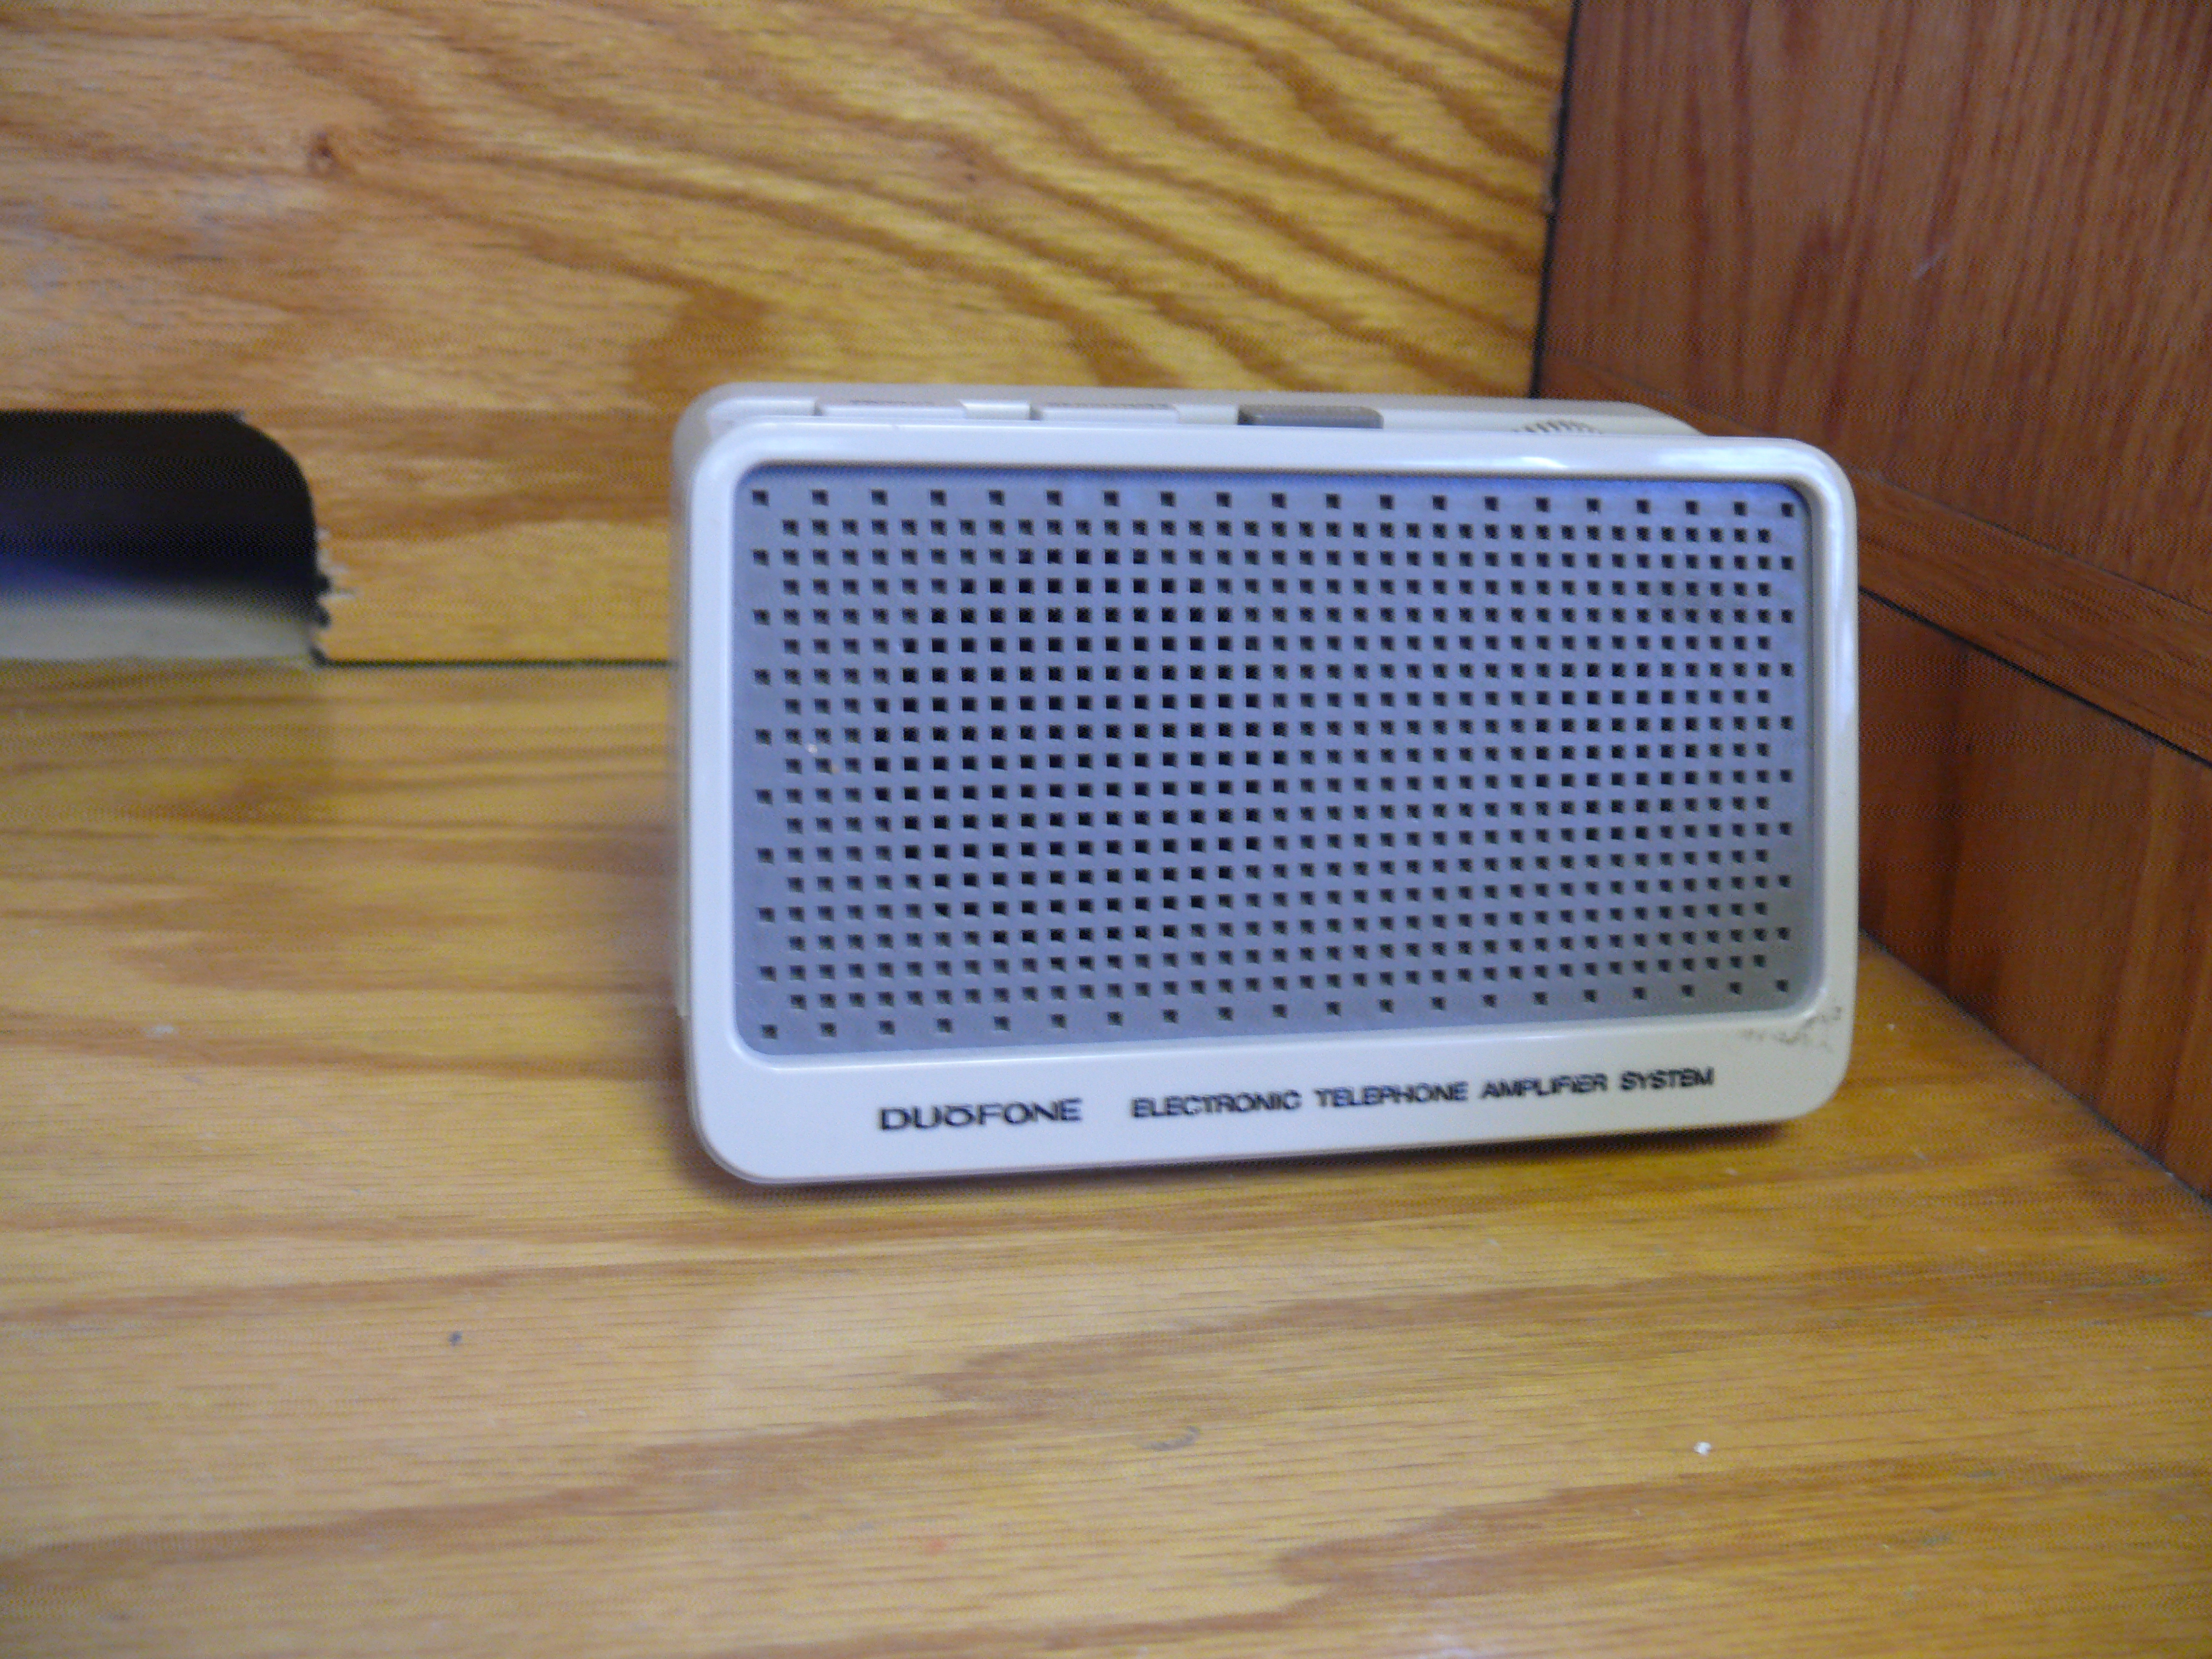 DuoFone Electronic Telephone Amplifier System